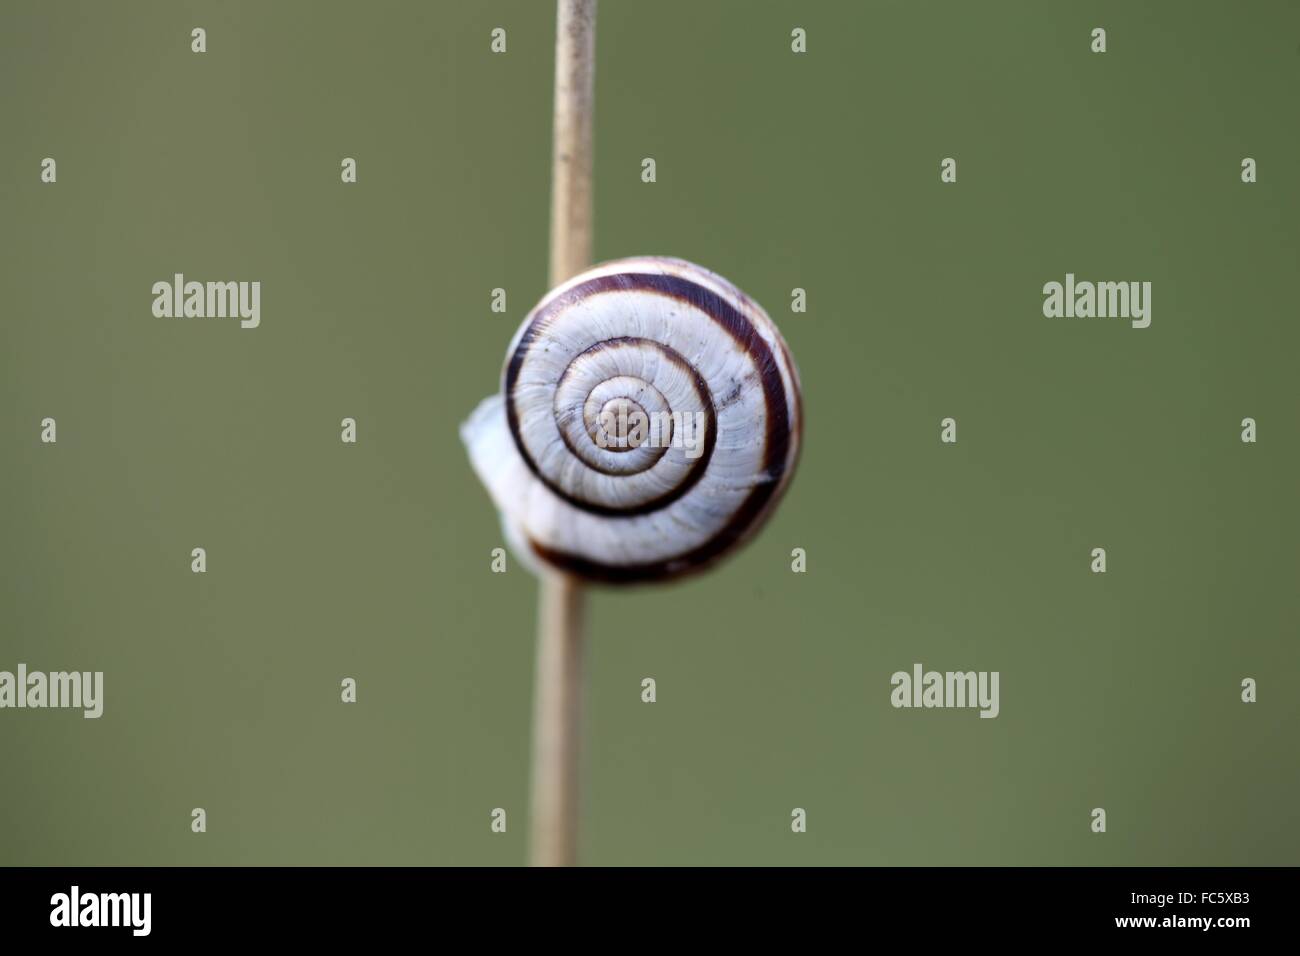 Macro photo of a small snail on dry grass. Stock Photo